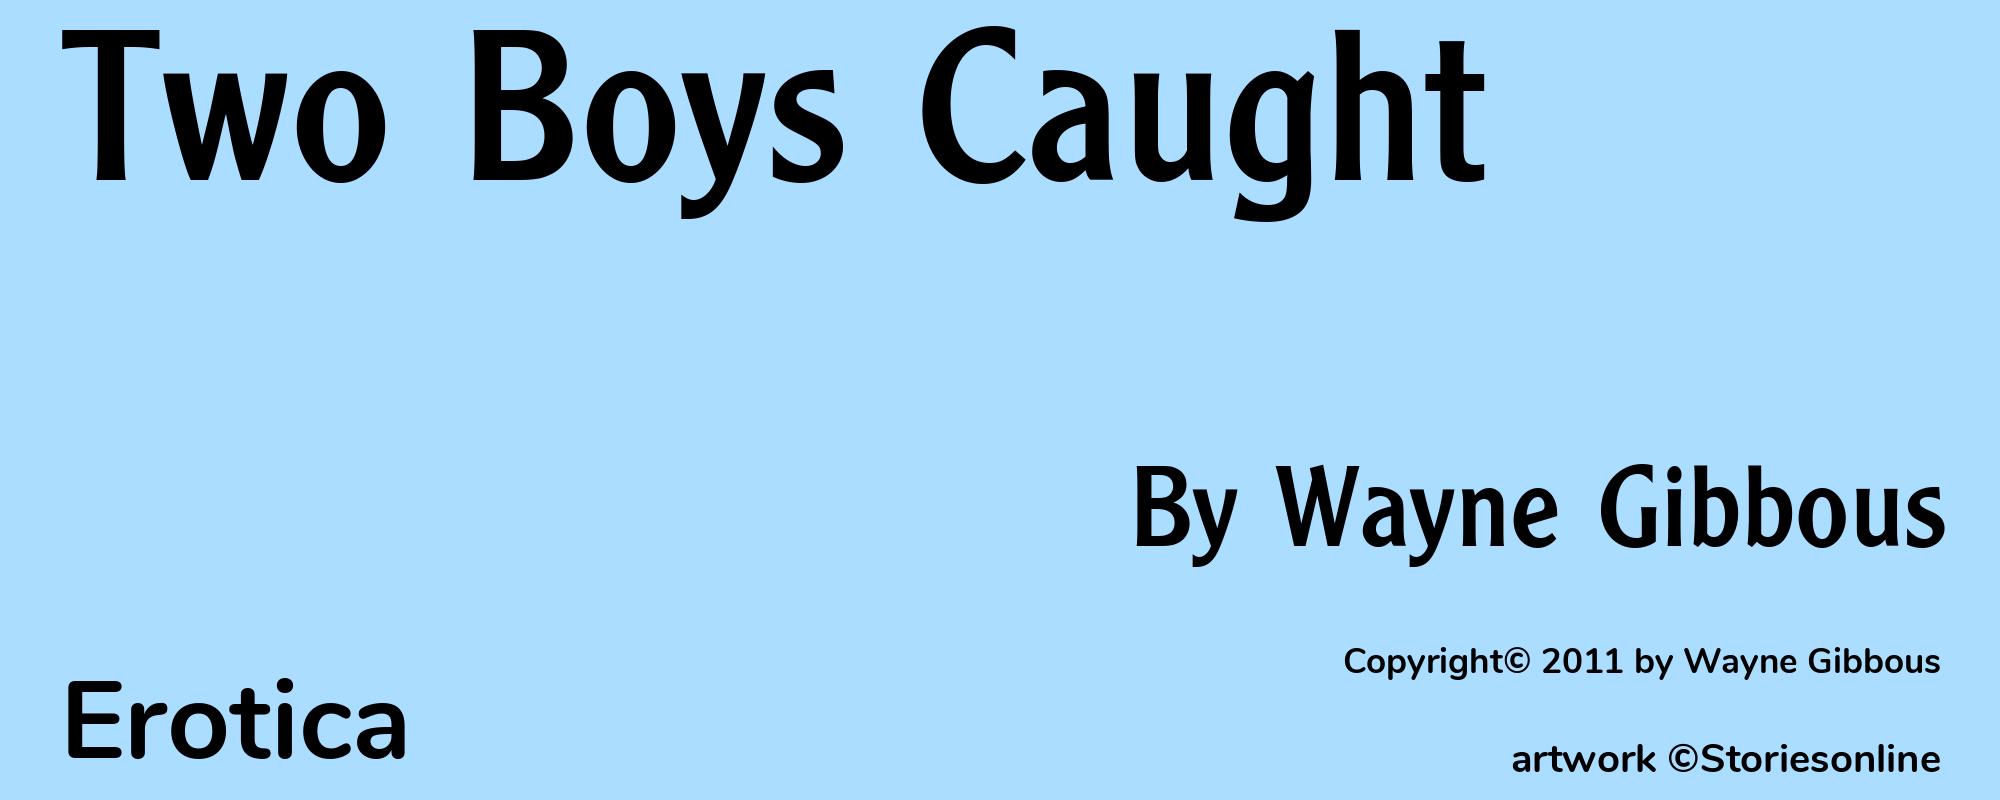 Two Boys Caught - Cover